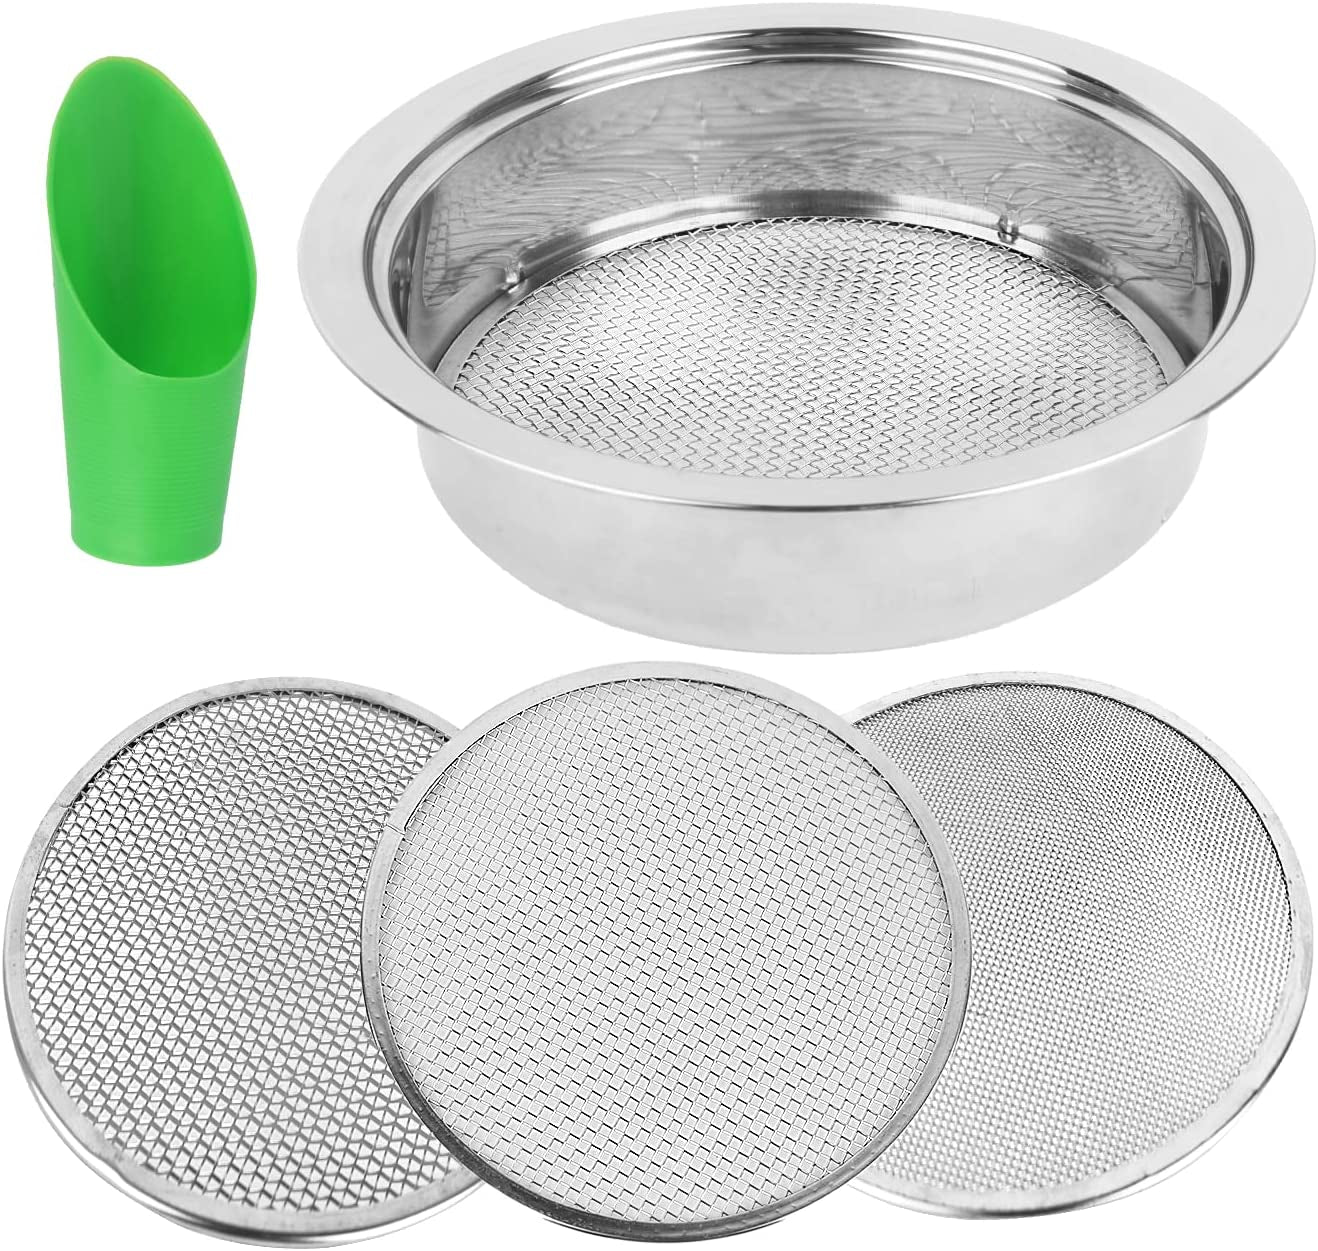 SOIL SIFTER, Garden Sieve Sifting Soil Sifter - Stainless Sieve,Φ9.5In Garden Sifter Interchangeable Sifting Pan Contain 3 Specification Soil Sieve,Soil Scoops Dirt Sifter for Sifting Soil,Peat Moss and More.